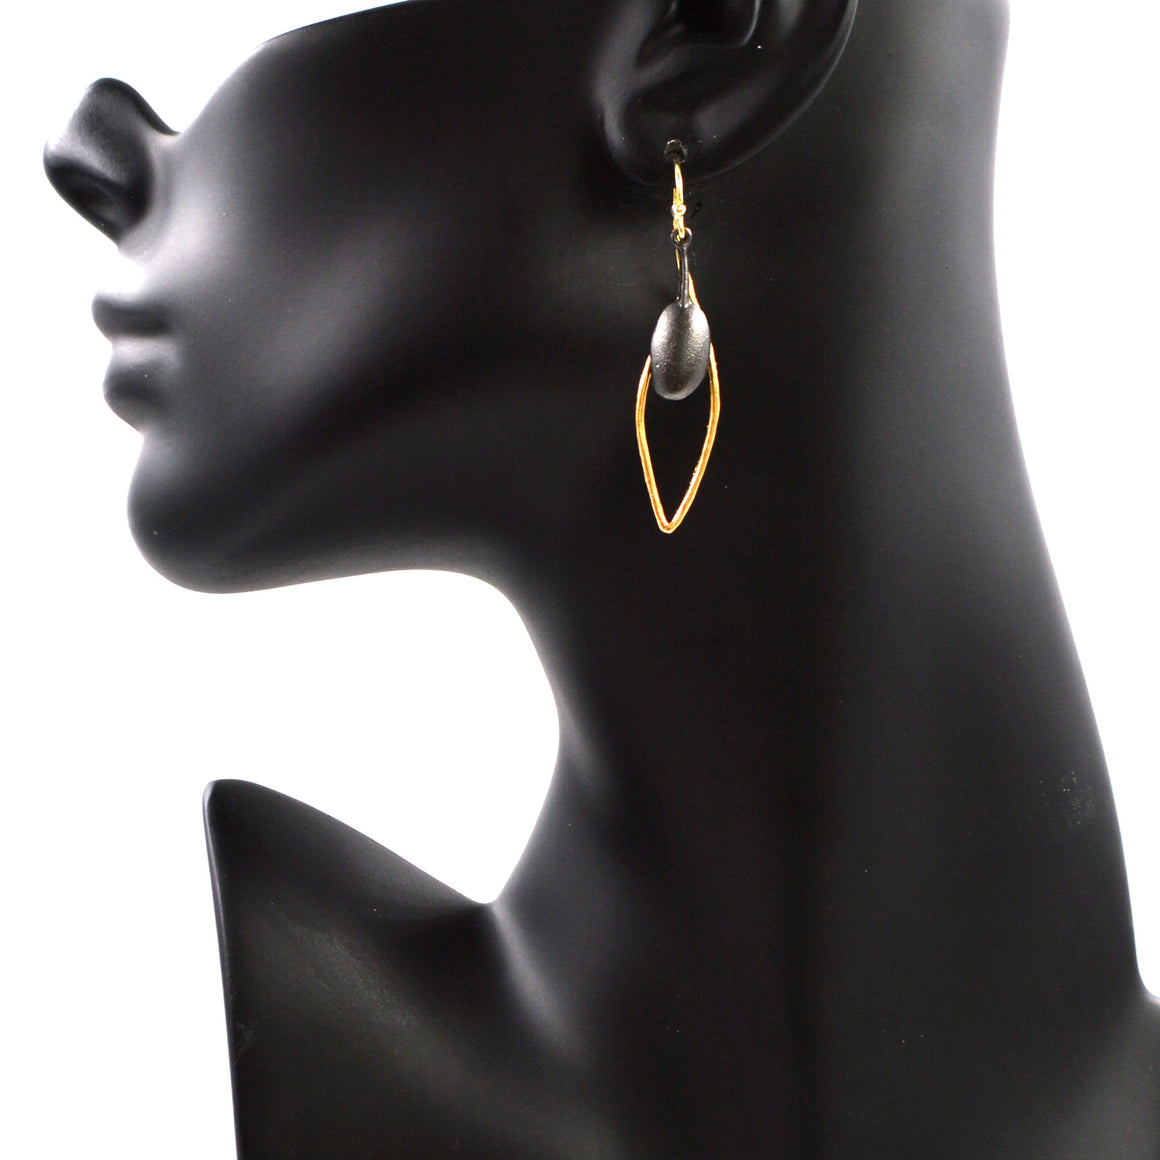 Olive Branch Leaf Earrings - 24K Gold Plated